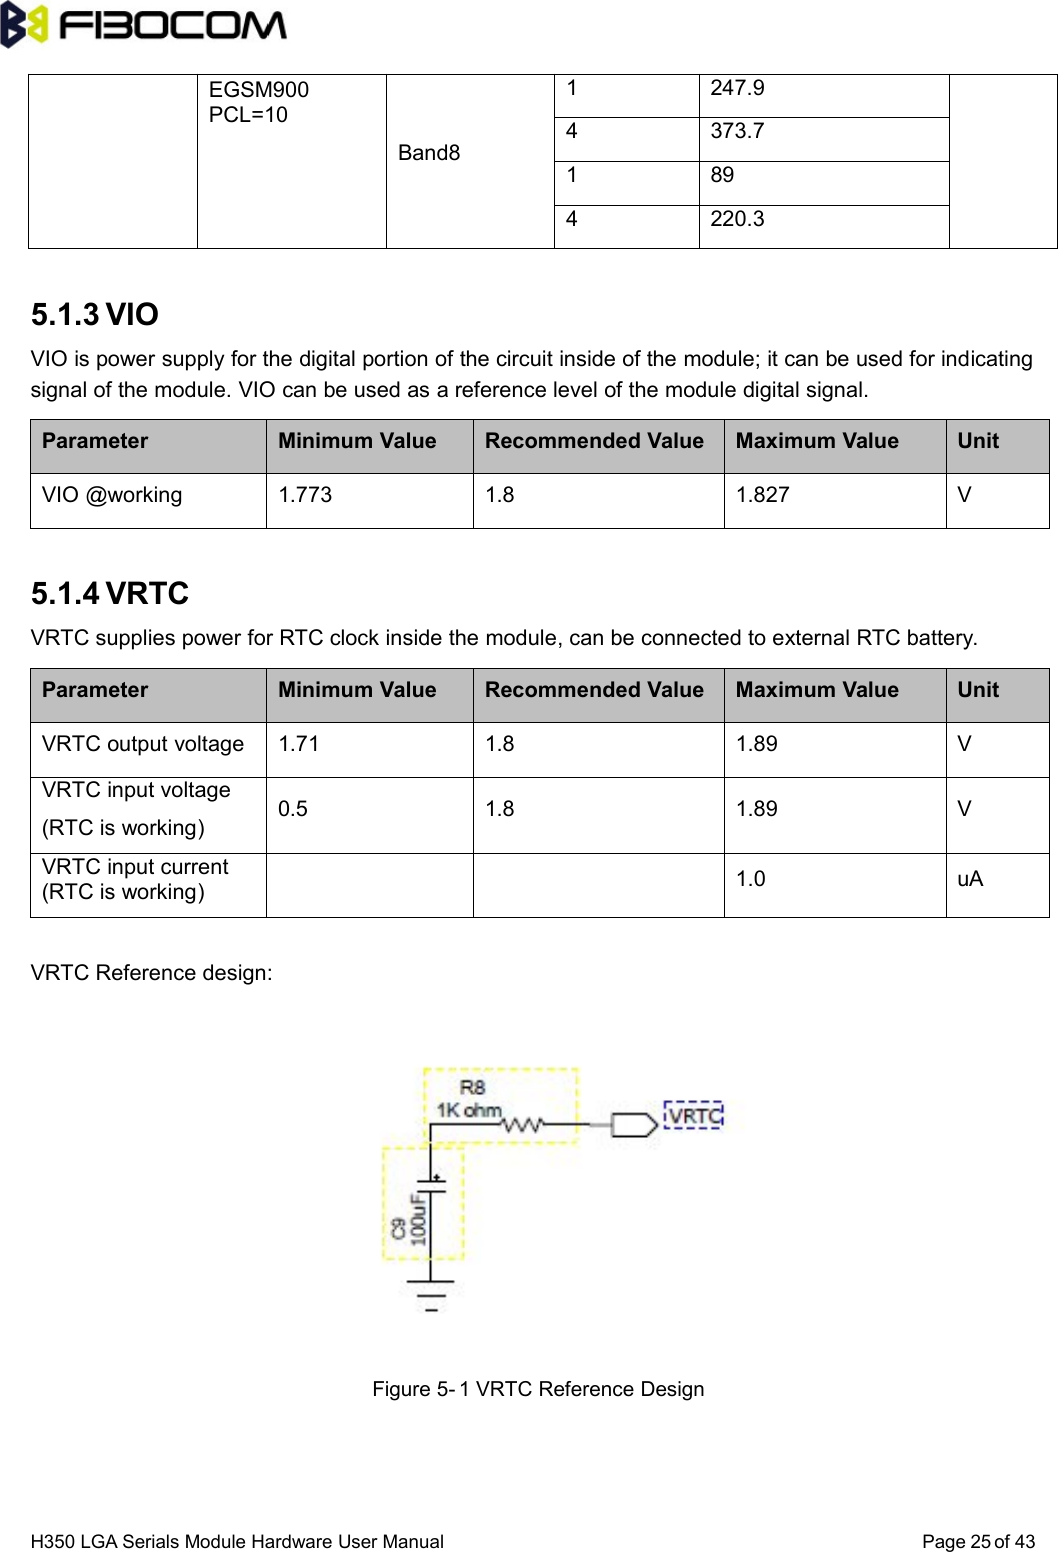 H350 LGA Serials Module Hardware User Manual Page of 4325EGSM900PCL=10Band81 247.94 373.71 894 220.35.1.3 VIOVIO is power supply for the digital portion of the circuit inside of the module; it can be used for indicatingsignal of the module. VIO can be used as a reference level of the module digital signal.Parameter Minimum Value Recommended Value Maximum Value UnitVIO @working 1.773 1.8 1.827 V5.1.4 VRTCVRTC supplies power for RTC clock inside the module, can be connected to external RTC battery.Parameter Minimum Value Recommended Value Maximum Value UnitVRTC output voltage 1.71 1.8 1.89 VVRTC input voltage(RTC is working) 0.5 1.8 1.89 VVRTC input current(RTC is working) 1.0 uAVRTC Reference design:Figure 5- 1 VRTC Reference Design